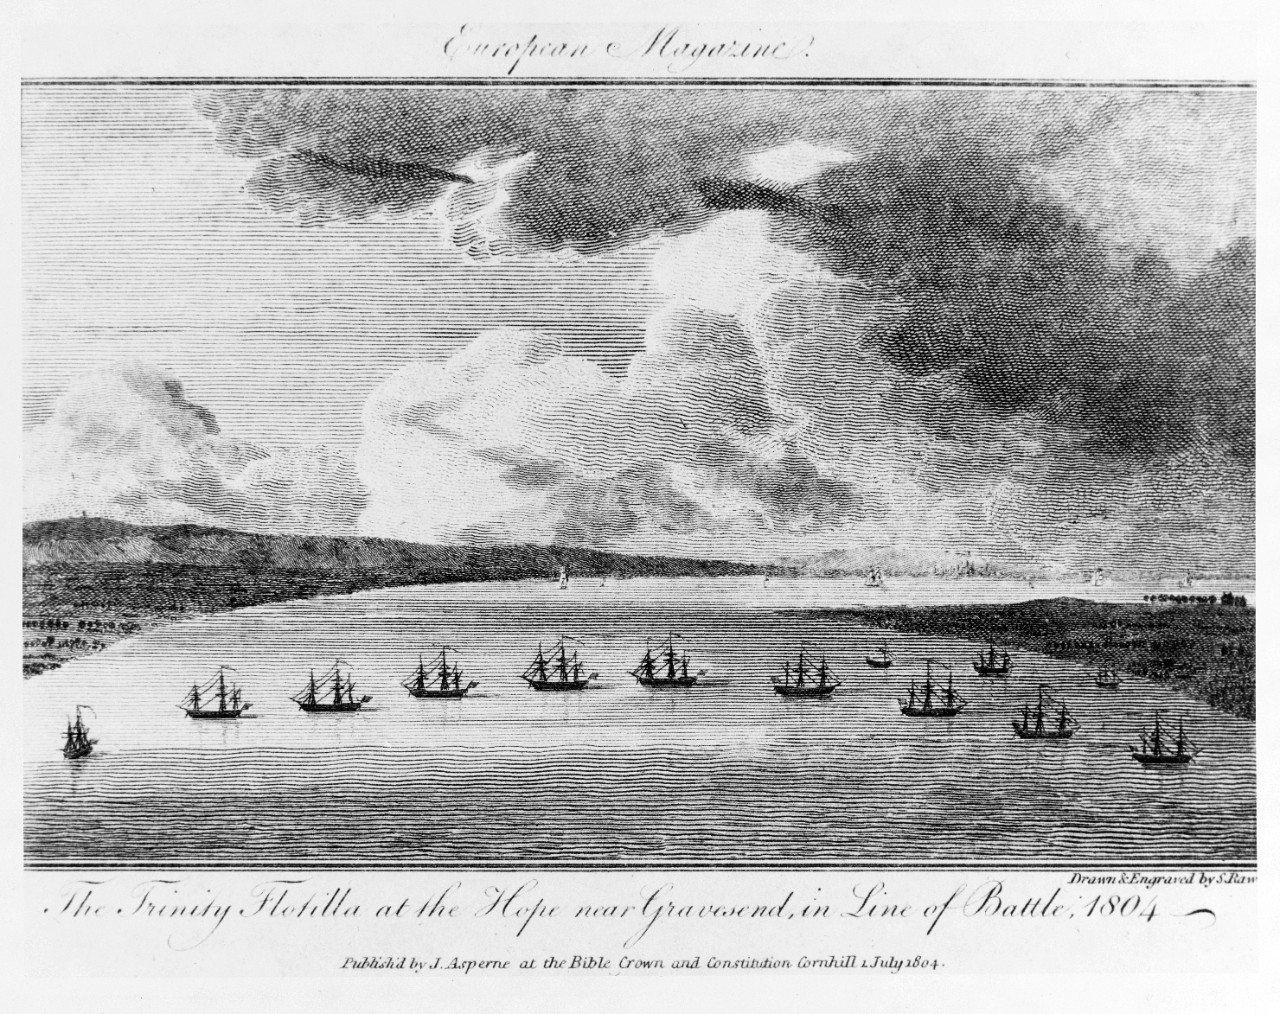 "The Trinity Flotilla at the Hope near Gravesend, in Line of Battle, 1804"